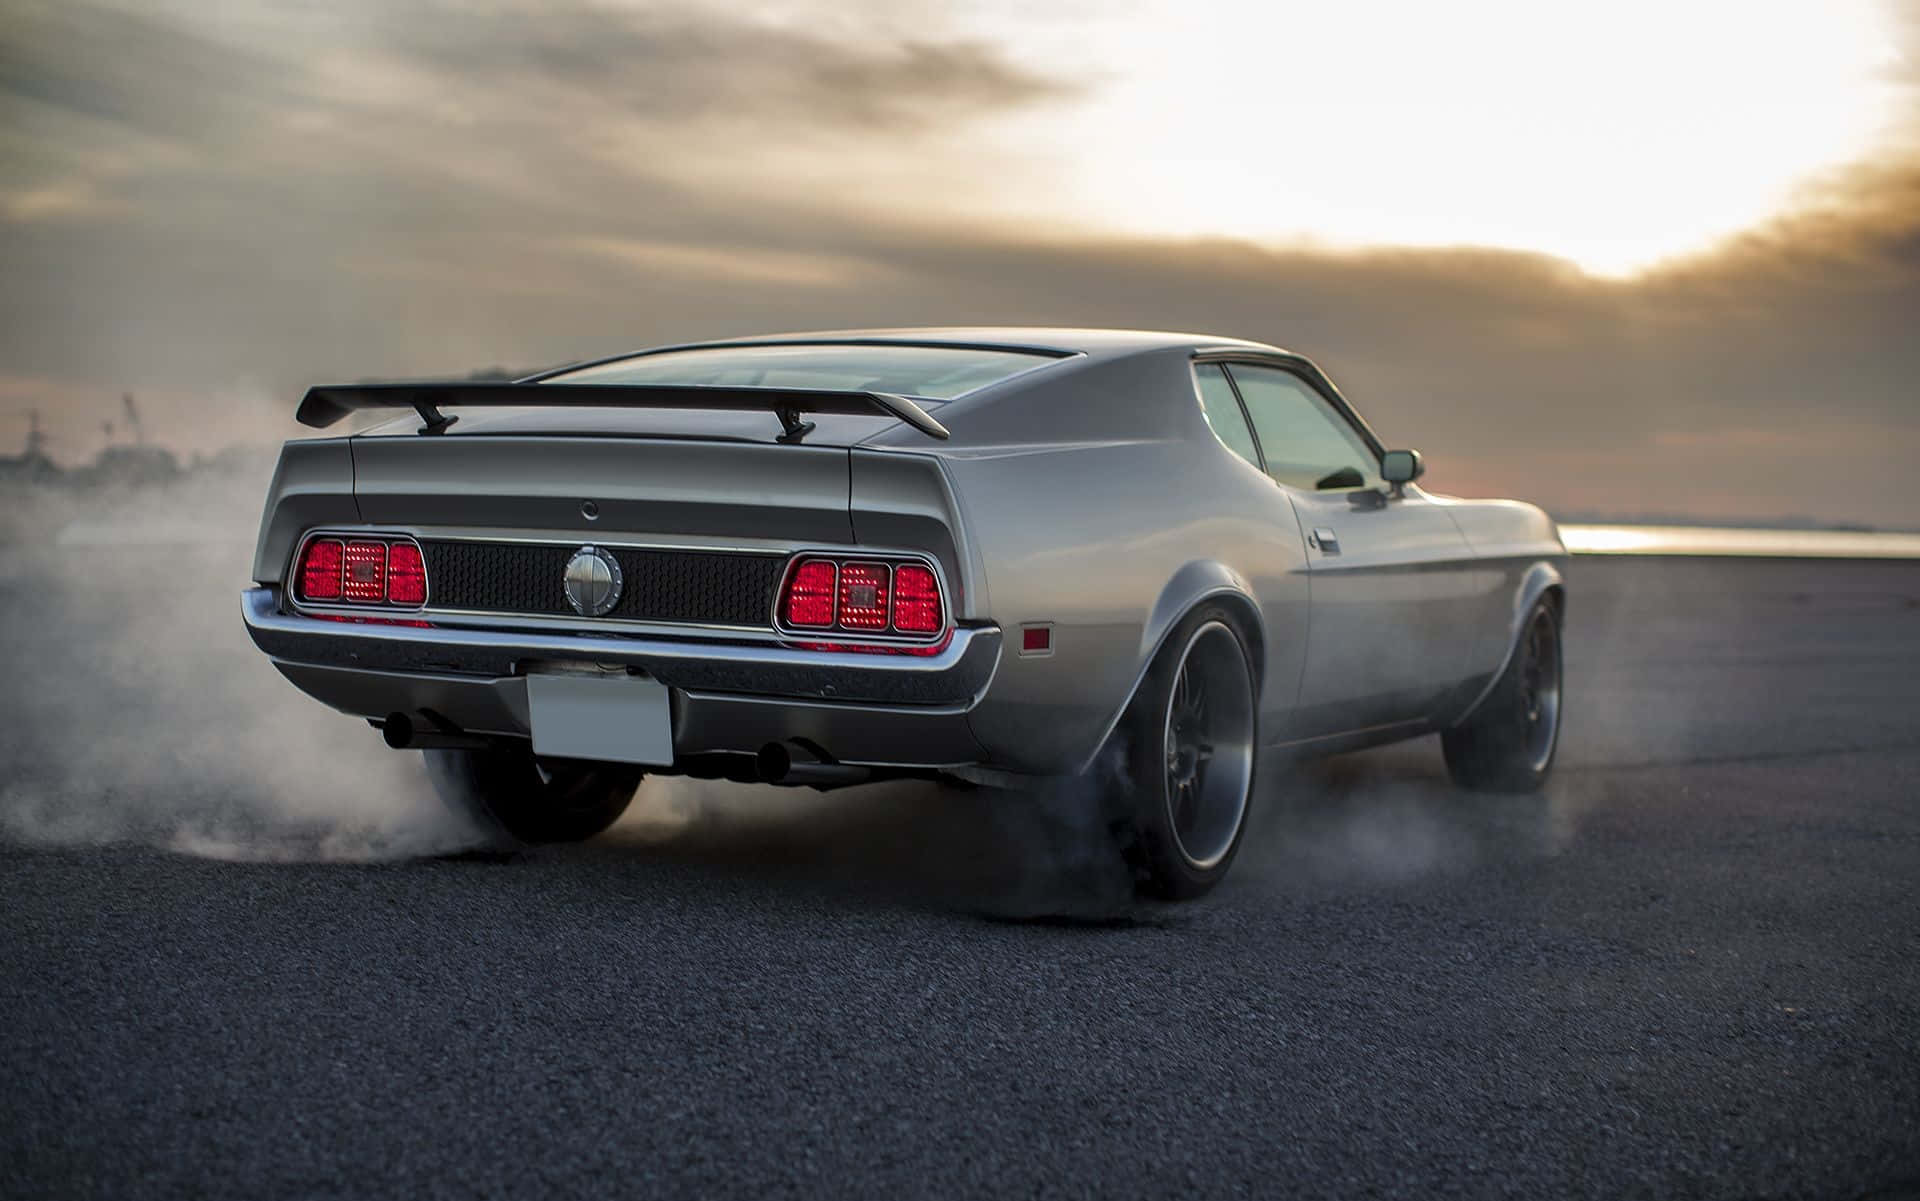 Sleek Ford Mustang Mach 1 in action on the open road. Wallpaper